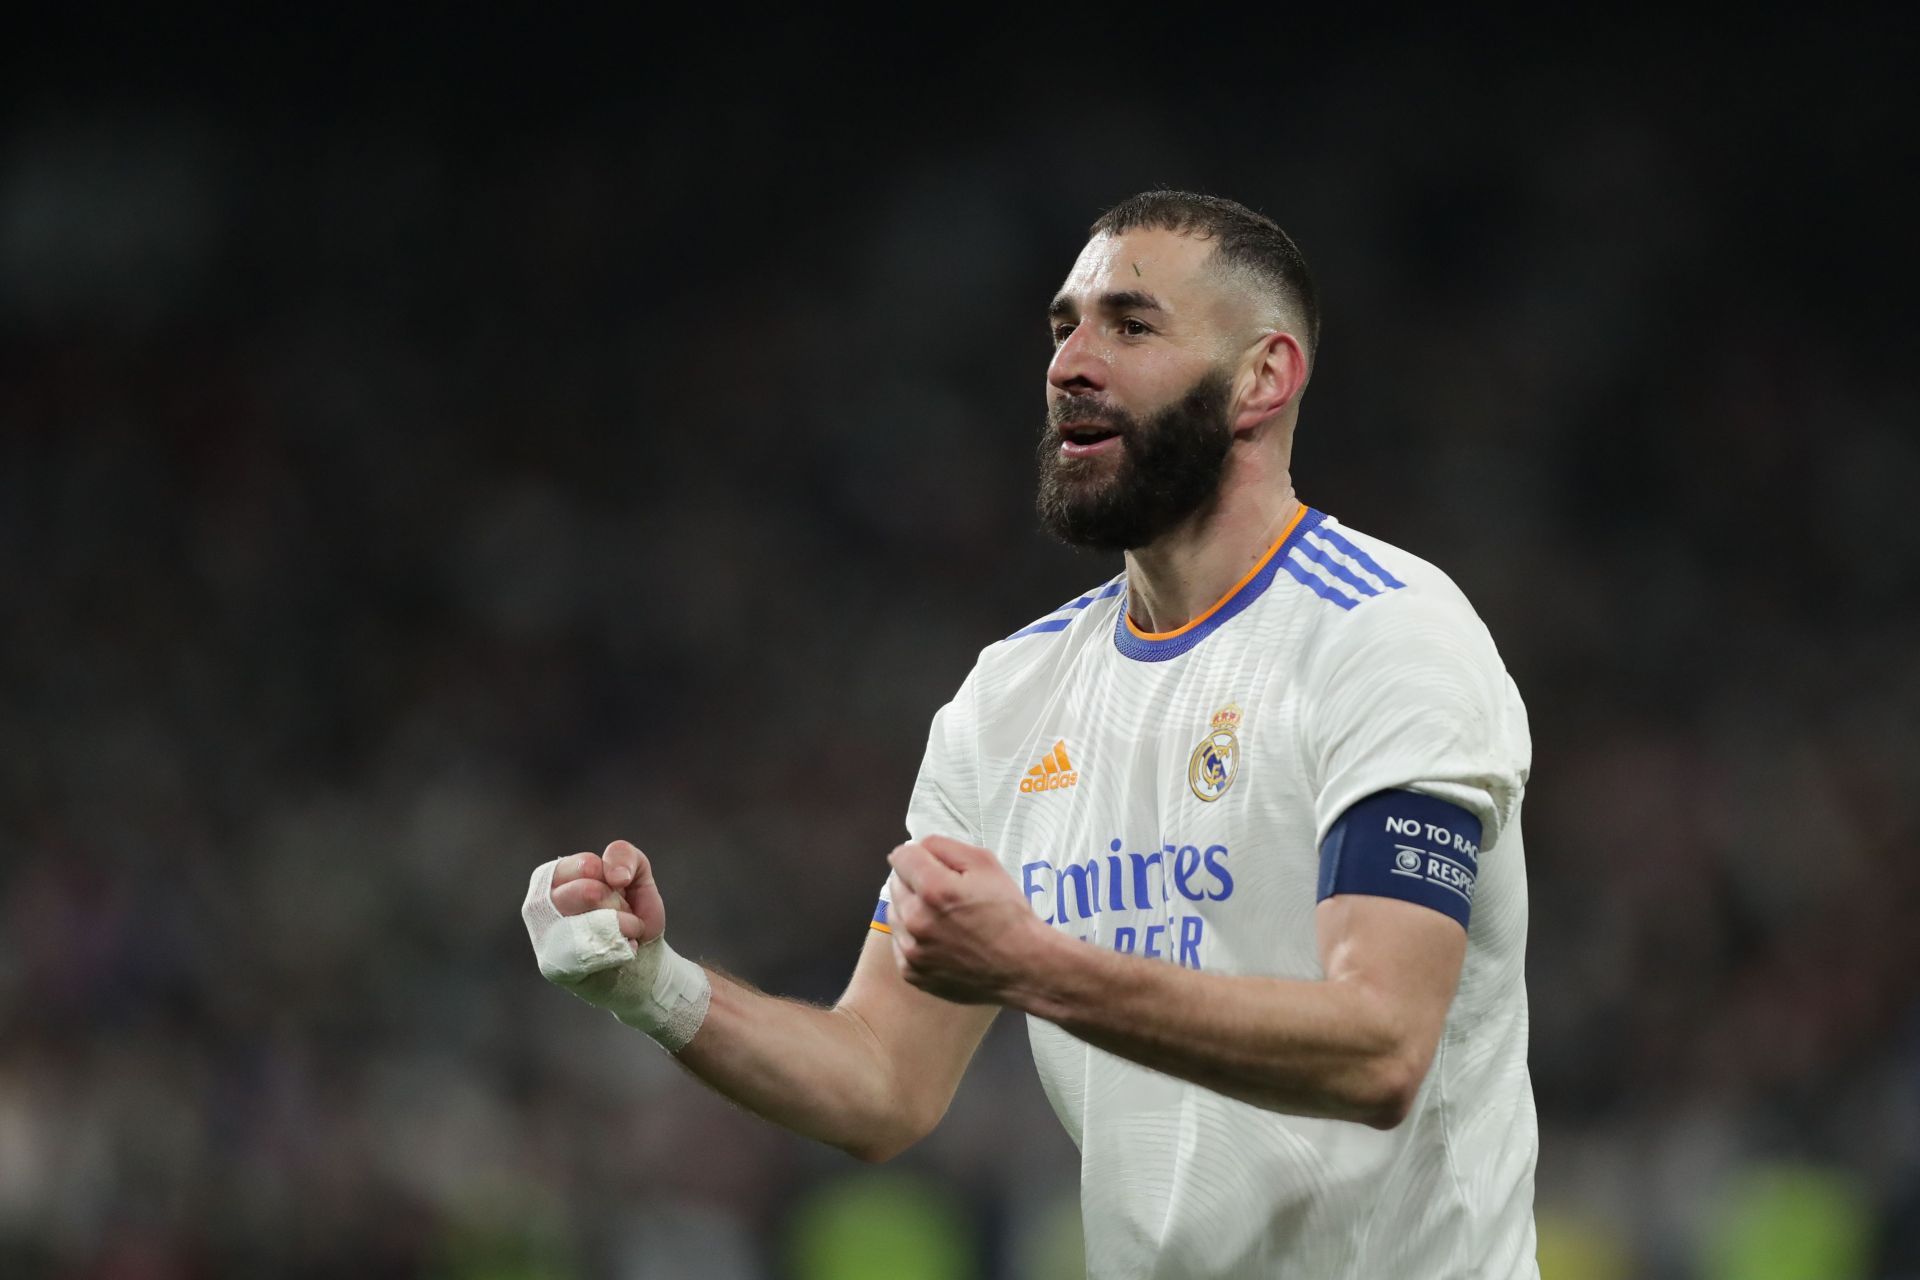 Karim Benzema scored a hat-trick for Real Madrid against PSG